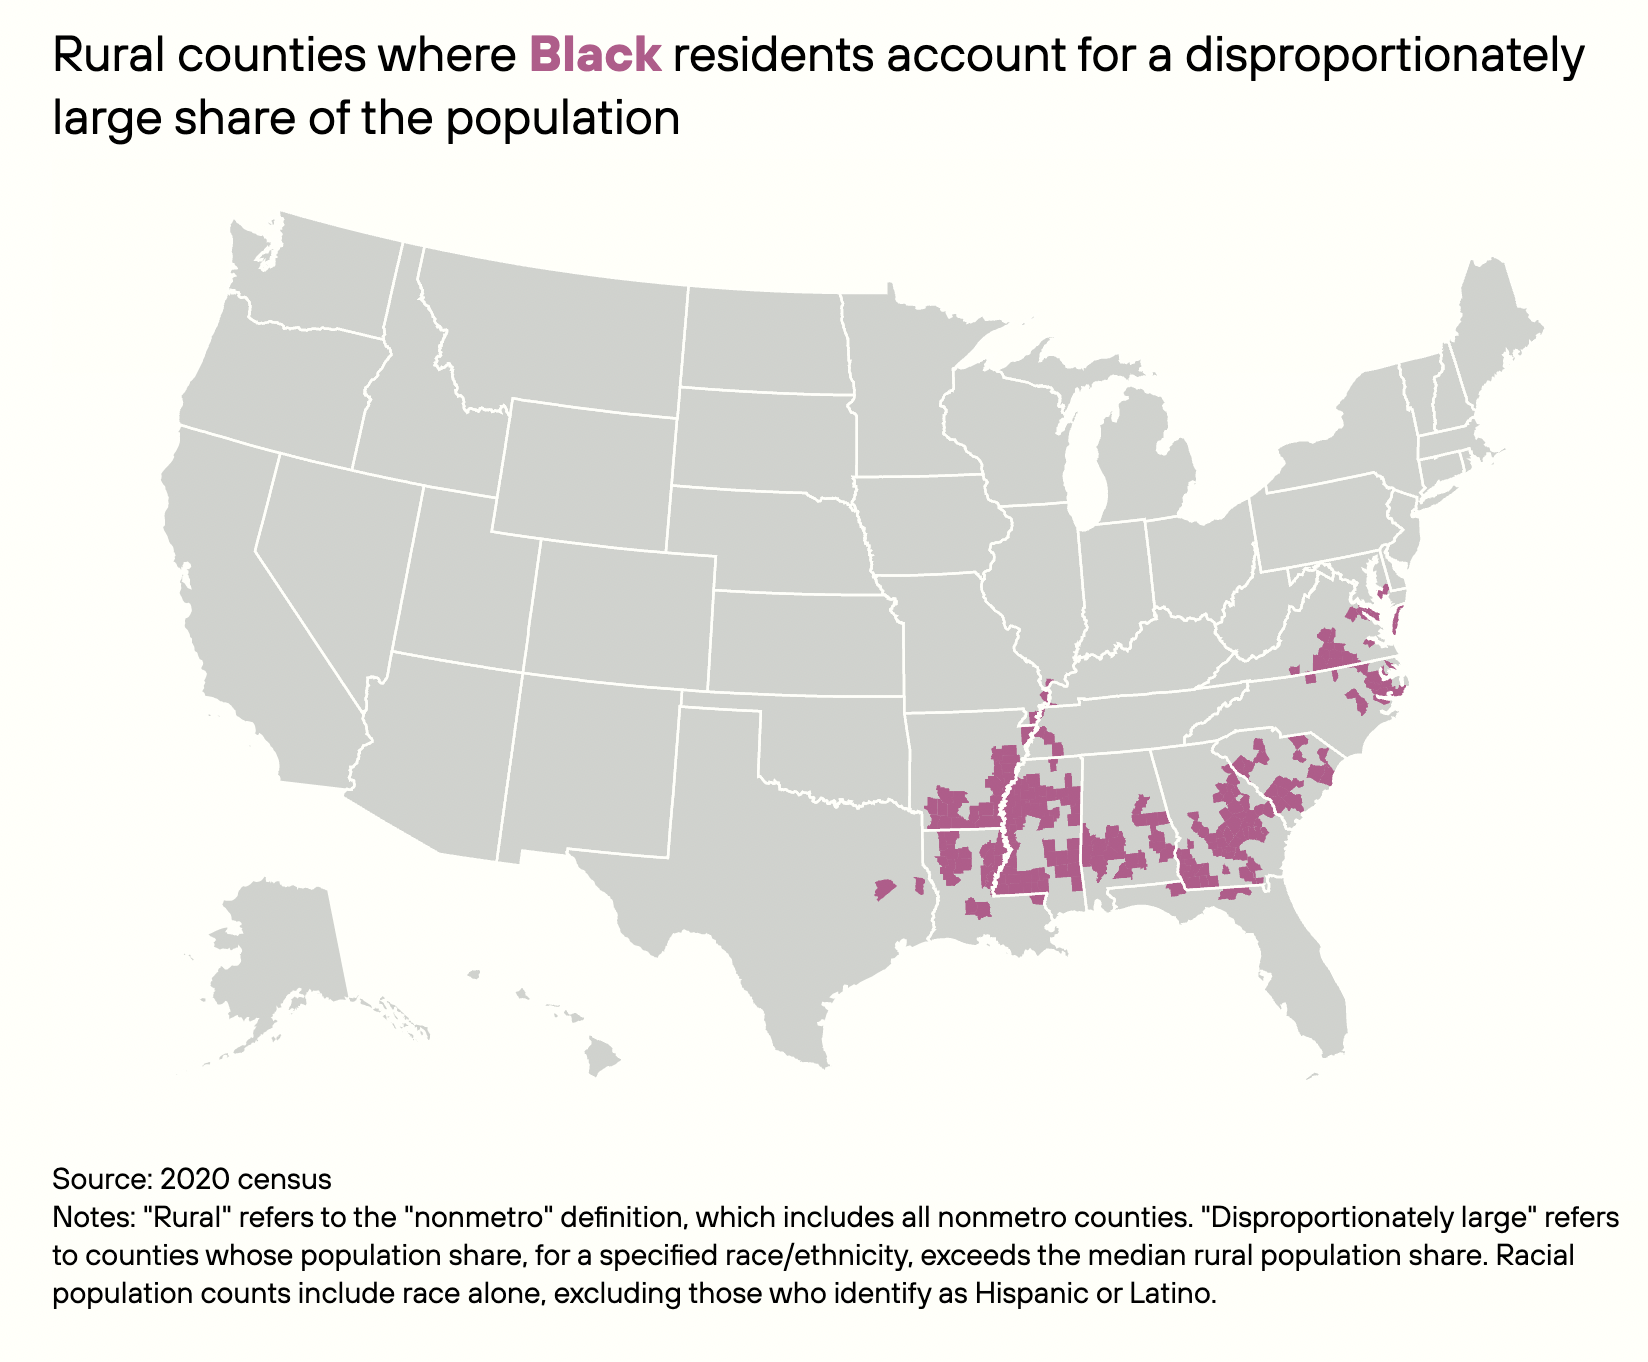 Map of rural counties where Black residents account for a disproportionately large share of the population